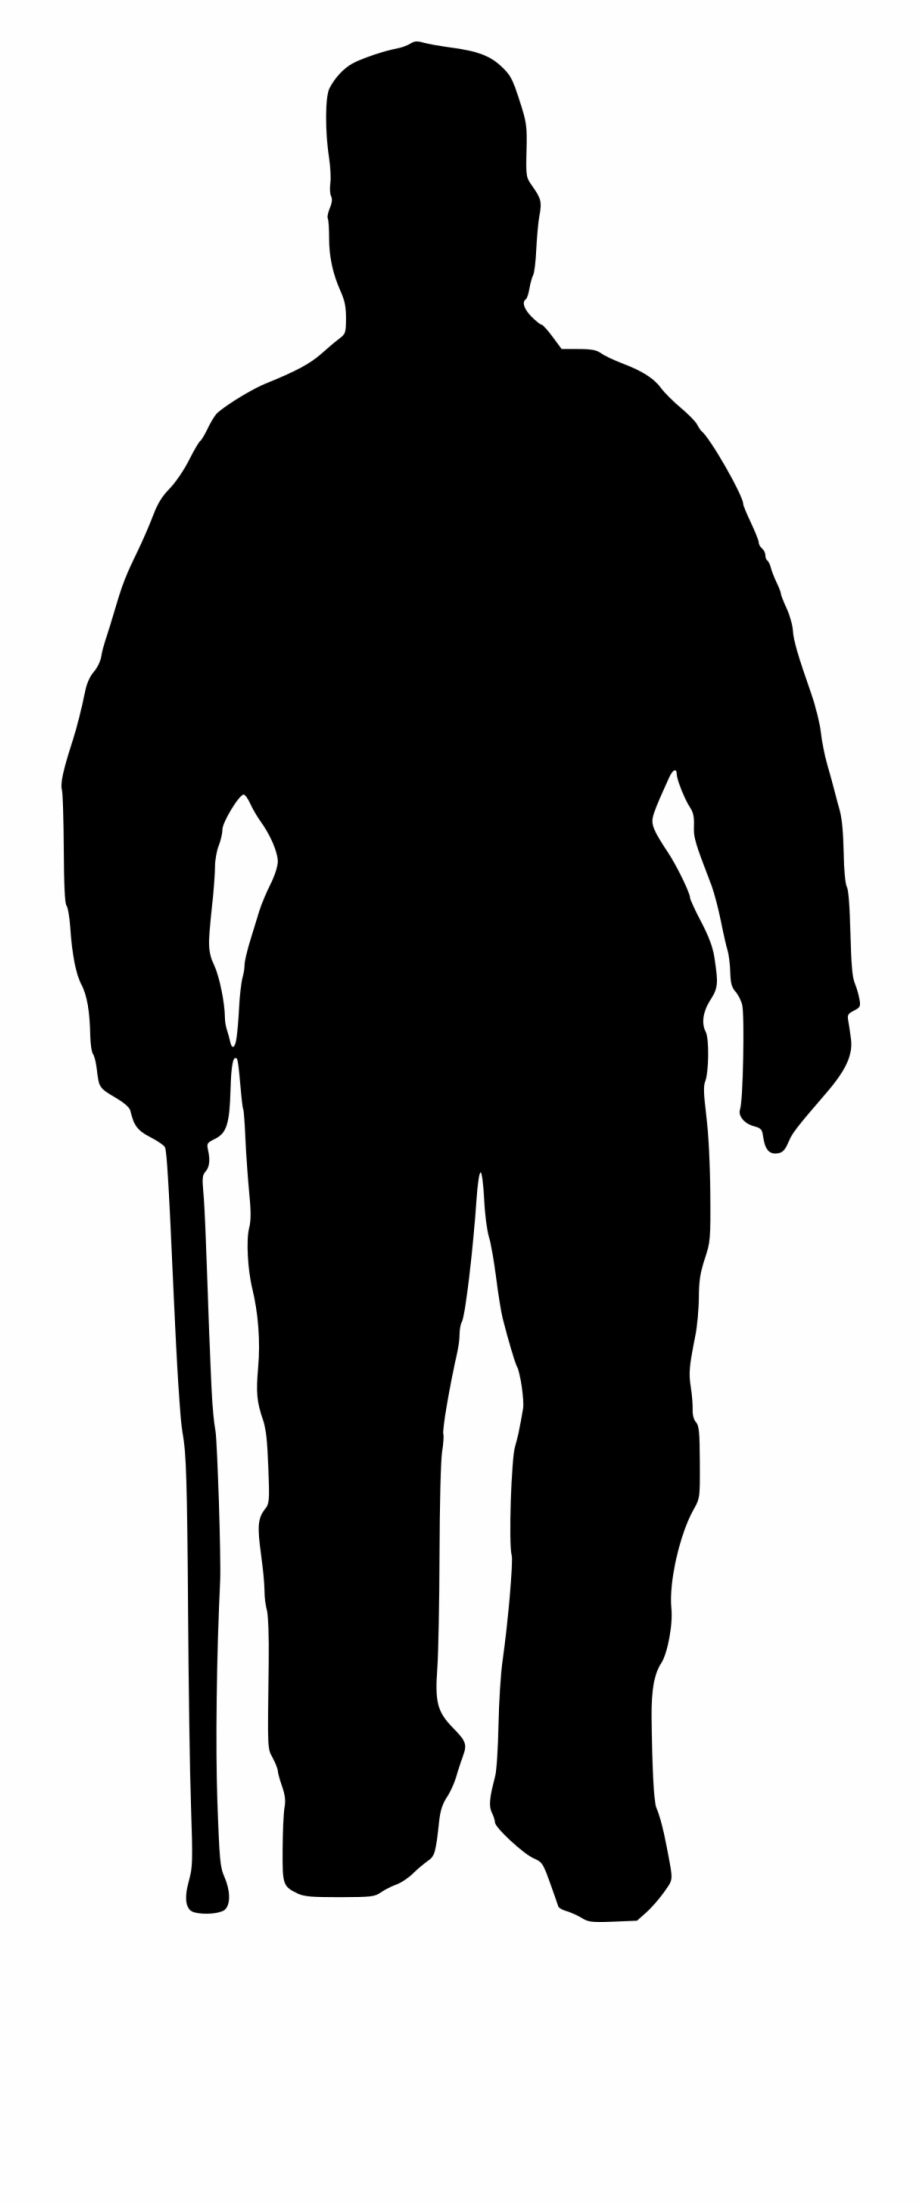 Download Clipart Silhouette Of Old Man